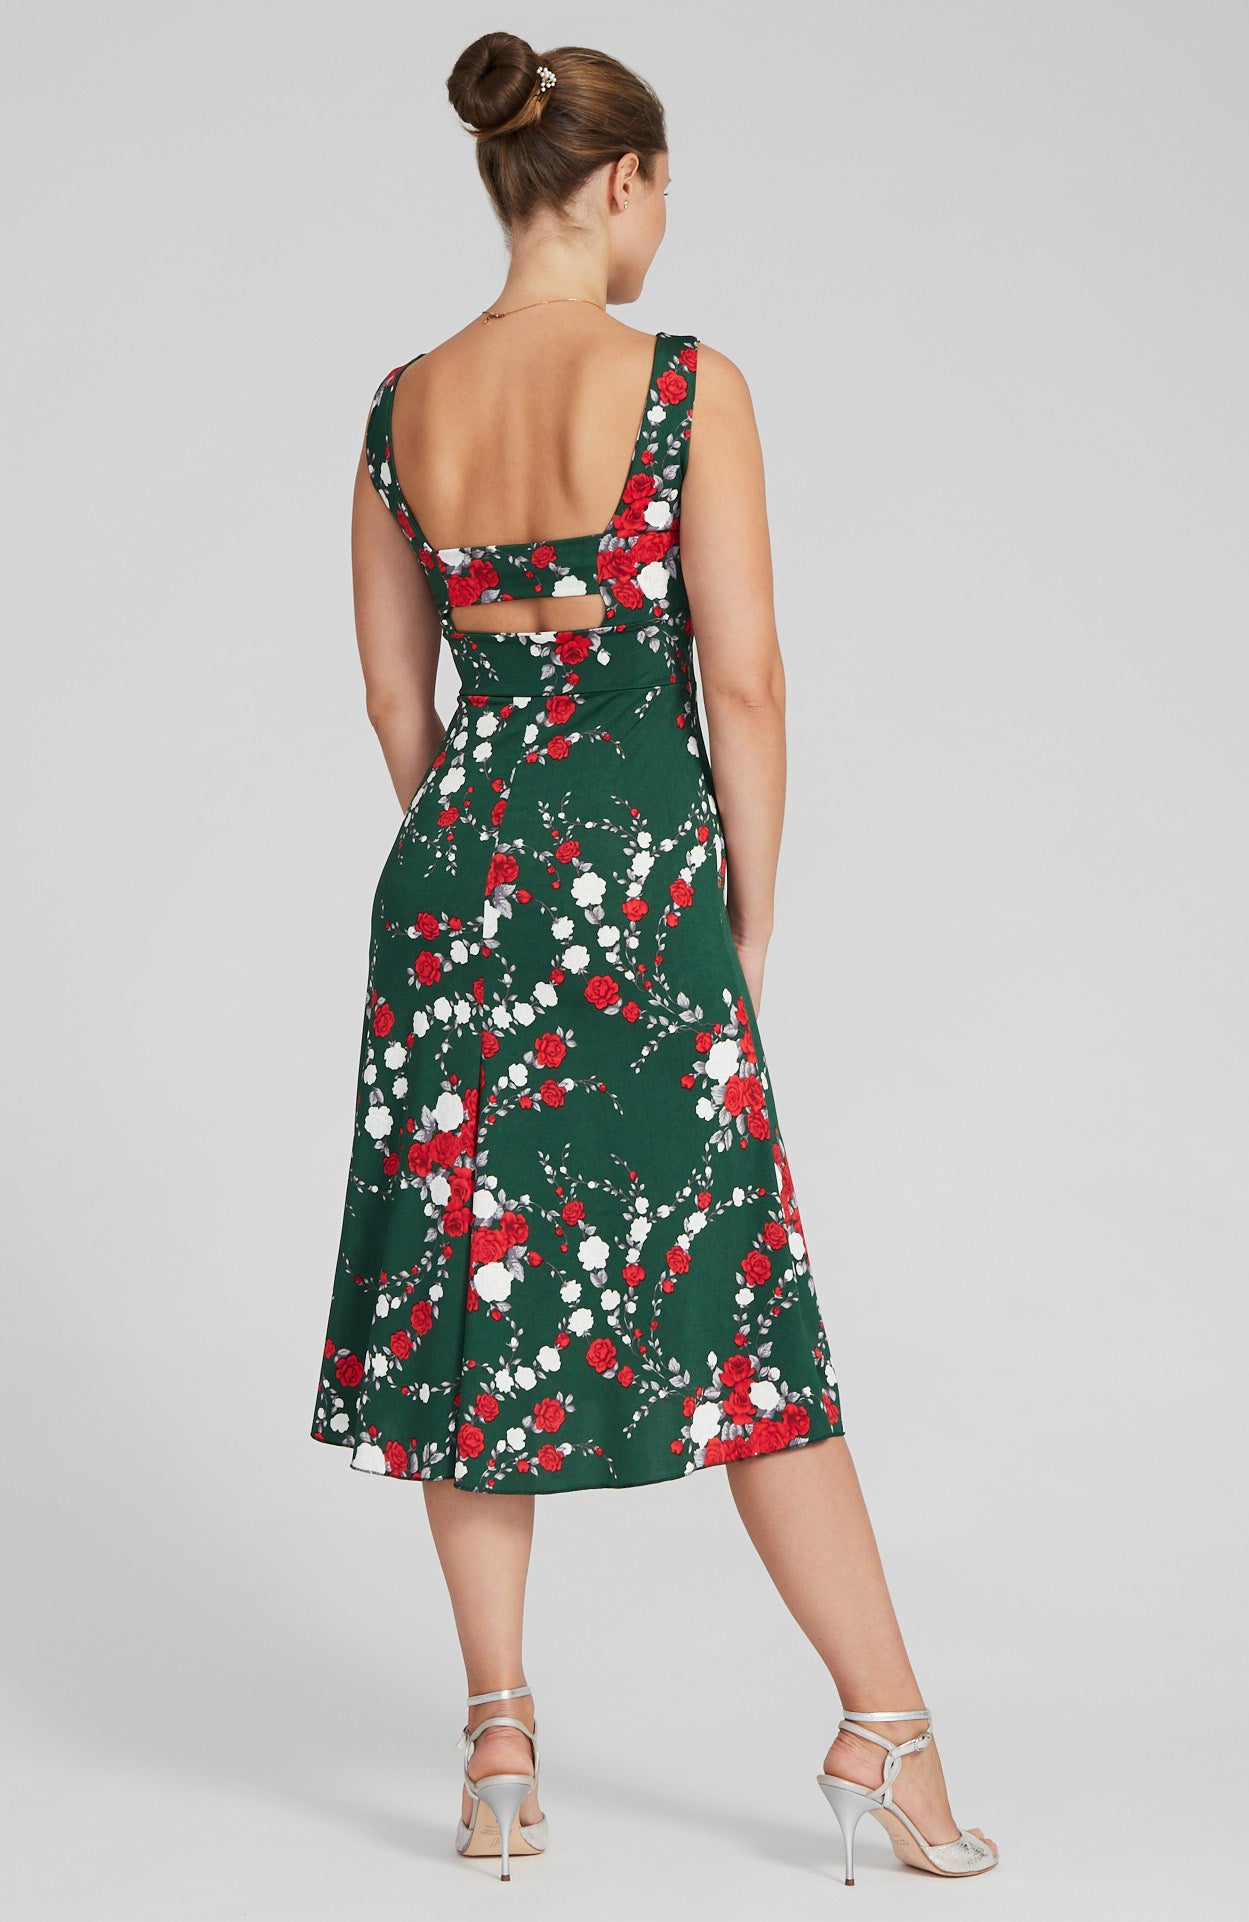 tango dress with open back in rose print